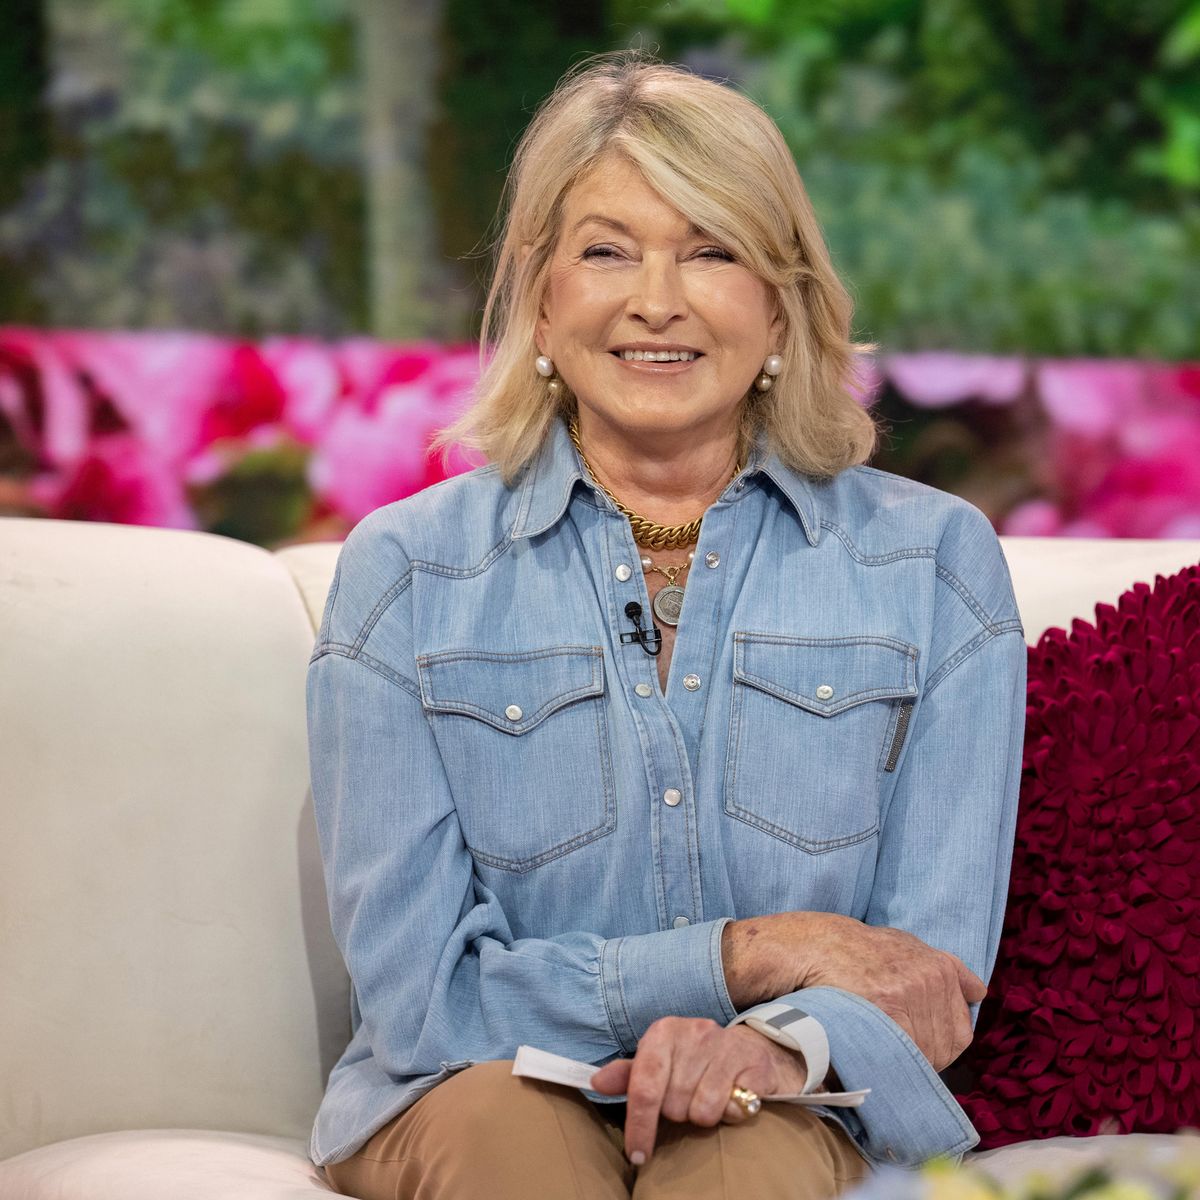 Martha Stewart Swears By These Fashion and Beauty Rules for Her